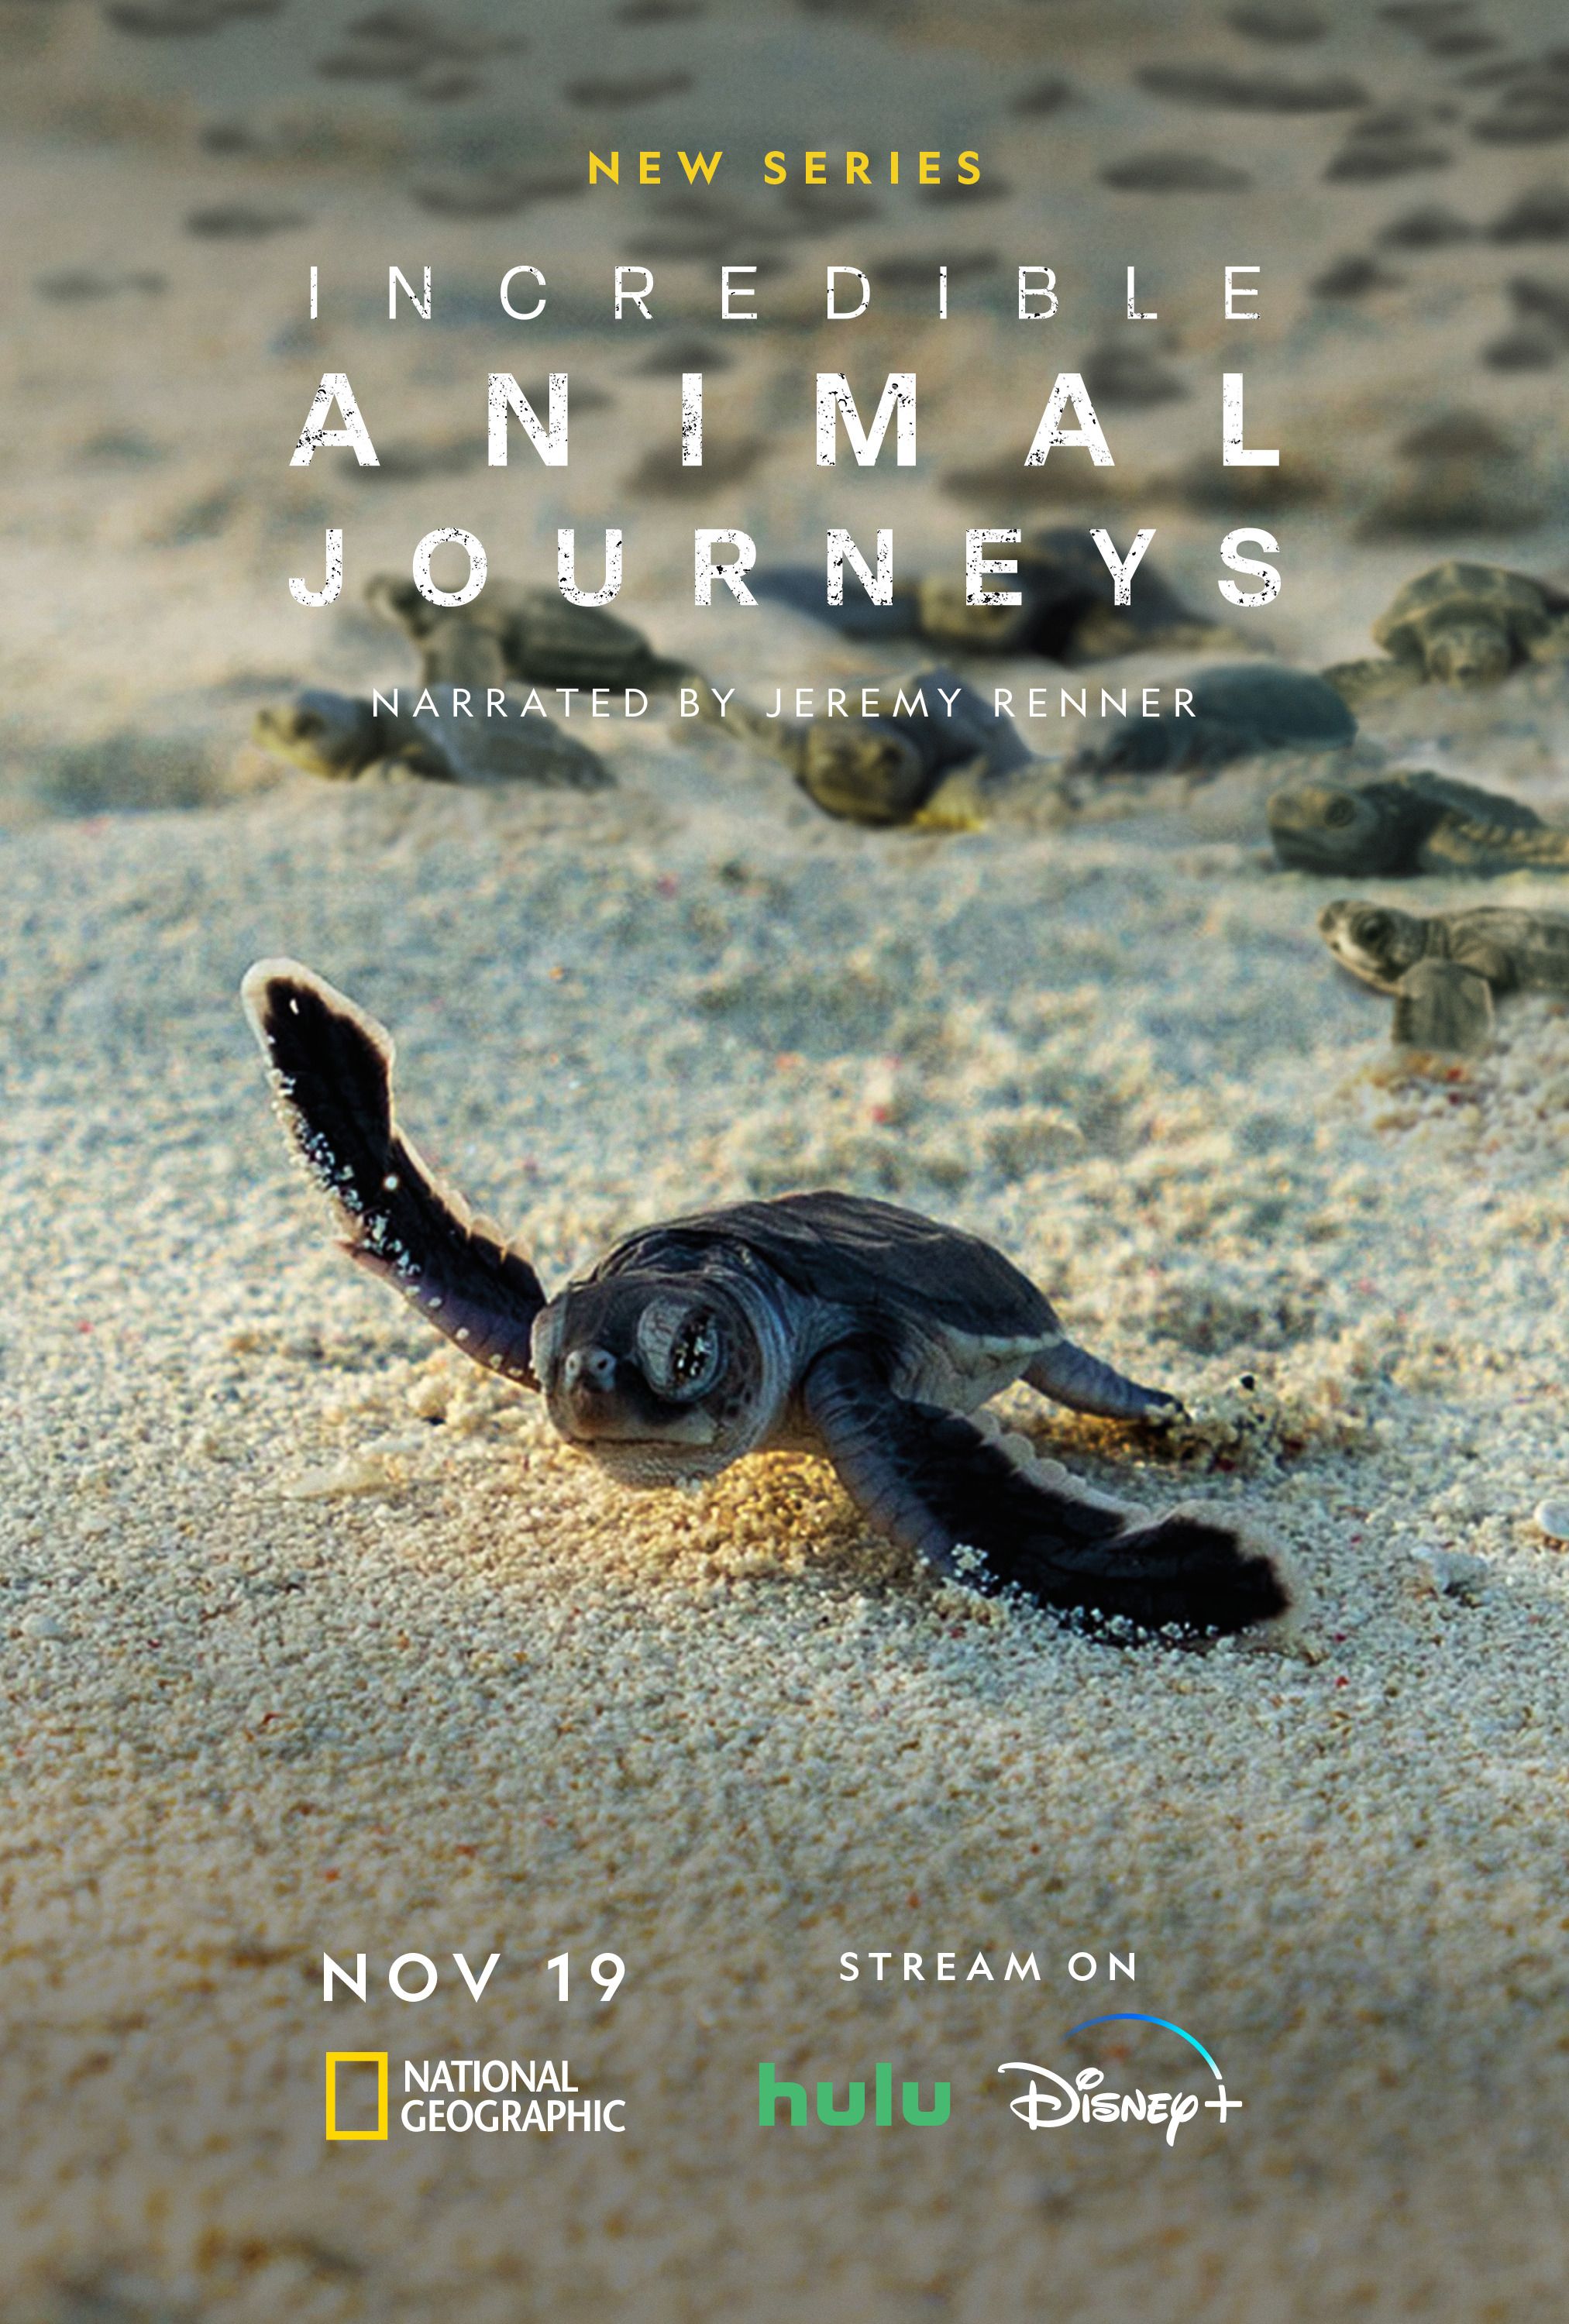 Incredible Animal Journeys Poster Feaaturing a Turtle Crawling on a Beach